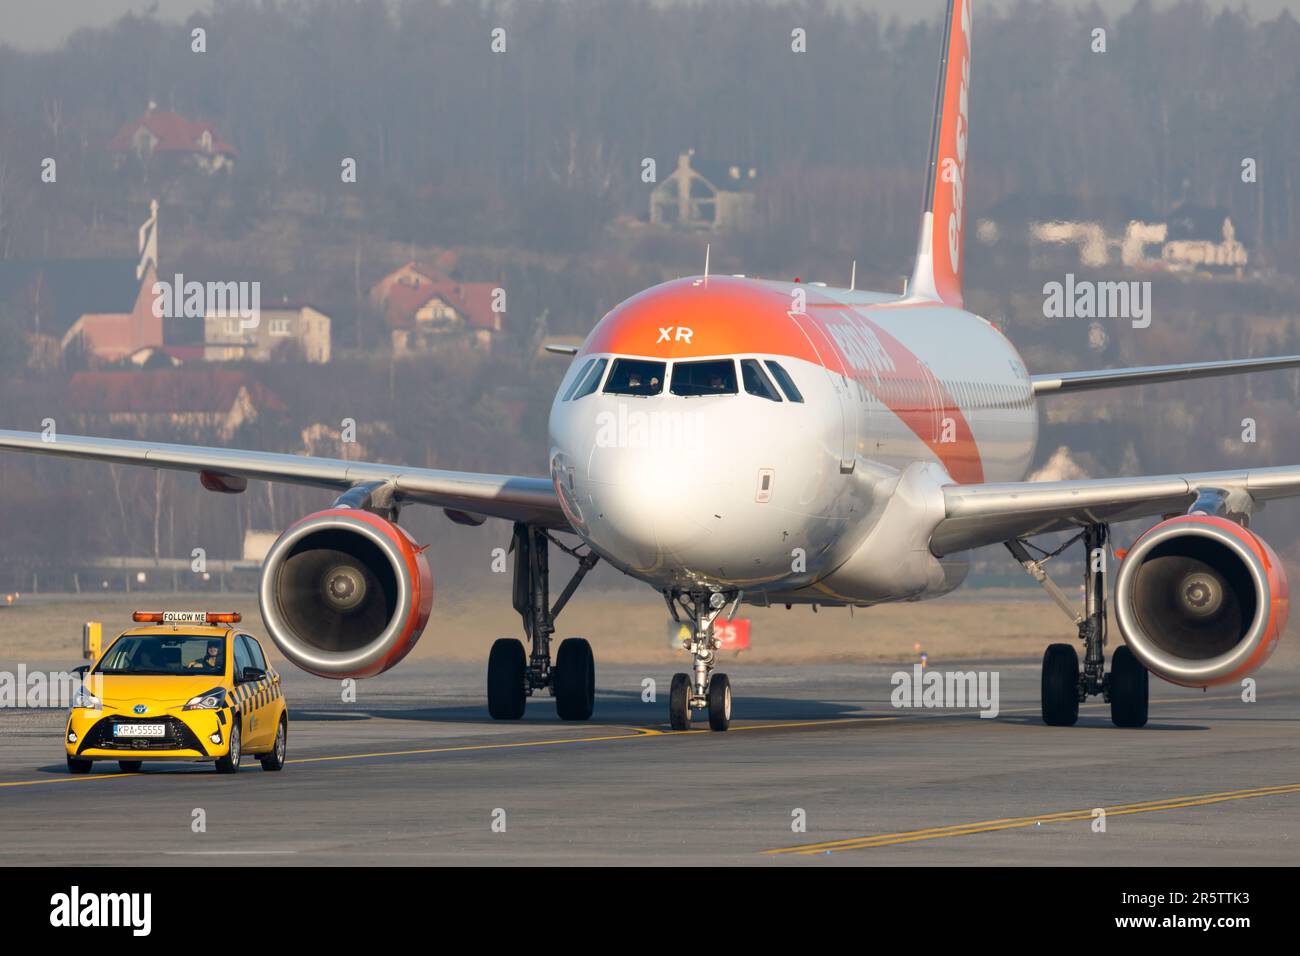 An orange and white single engine jet is parked on a runway next to a large truck Stock Photo